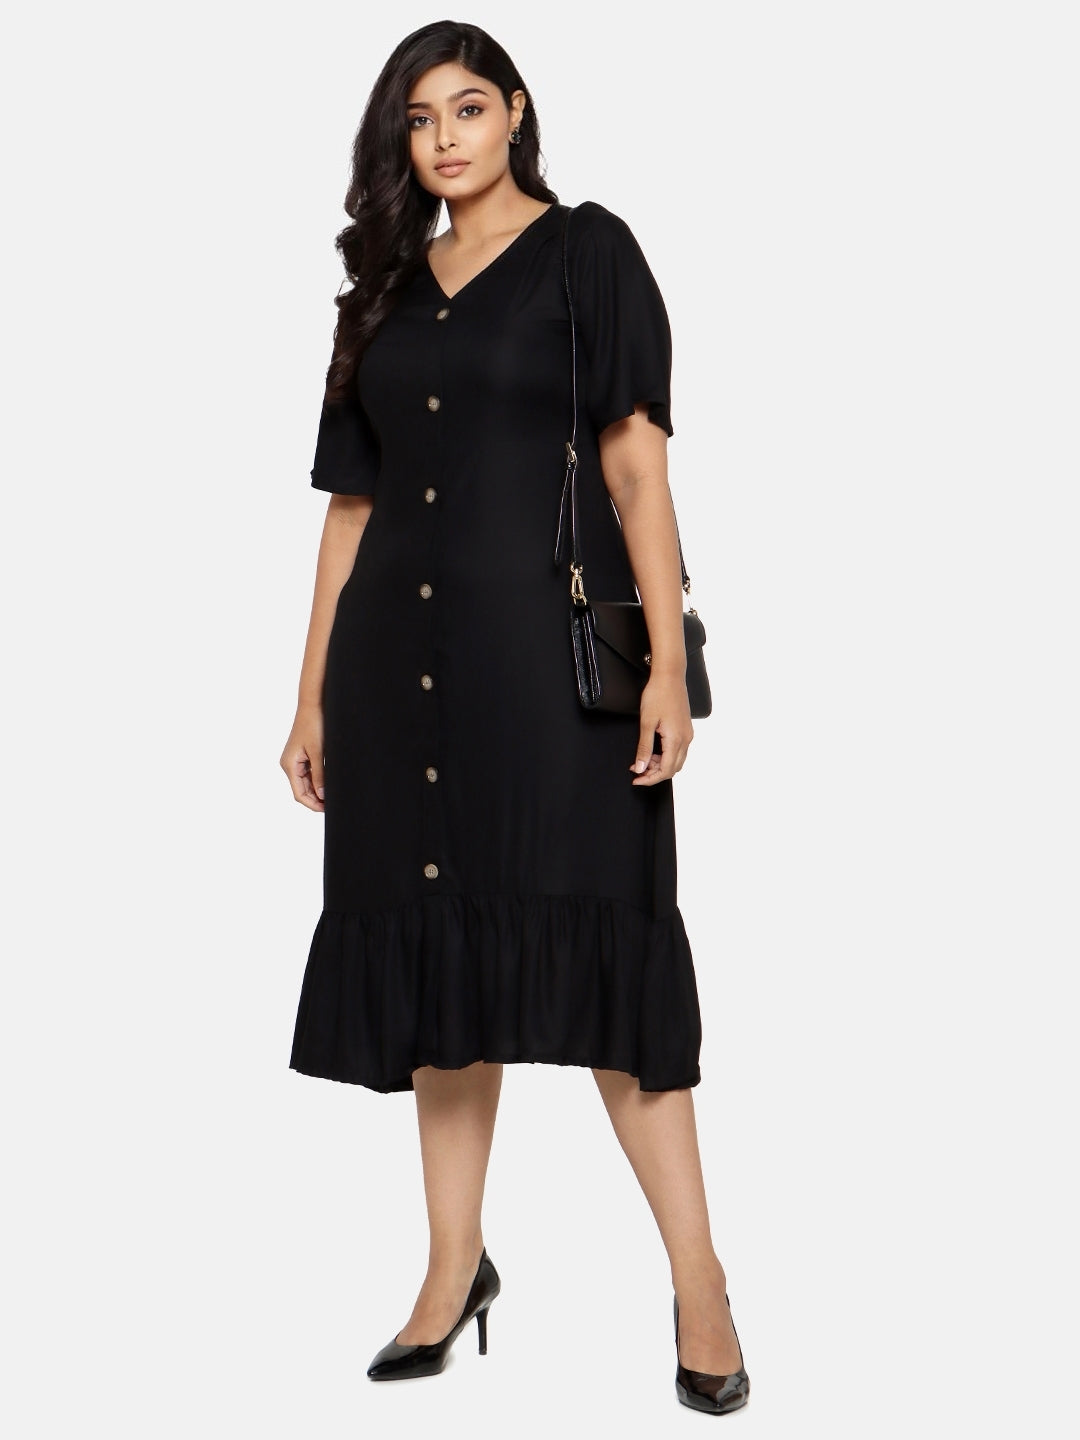 BLACK A LINE DRESS WITH BUTTONS